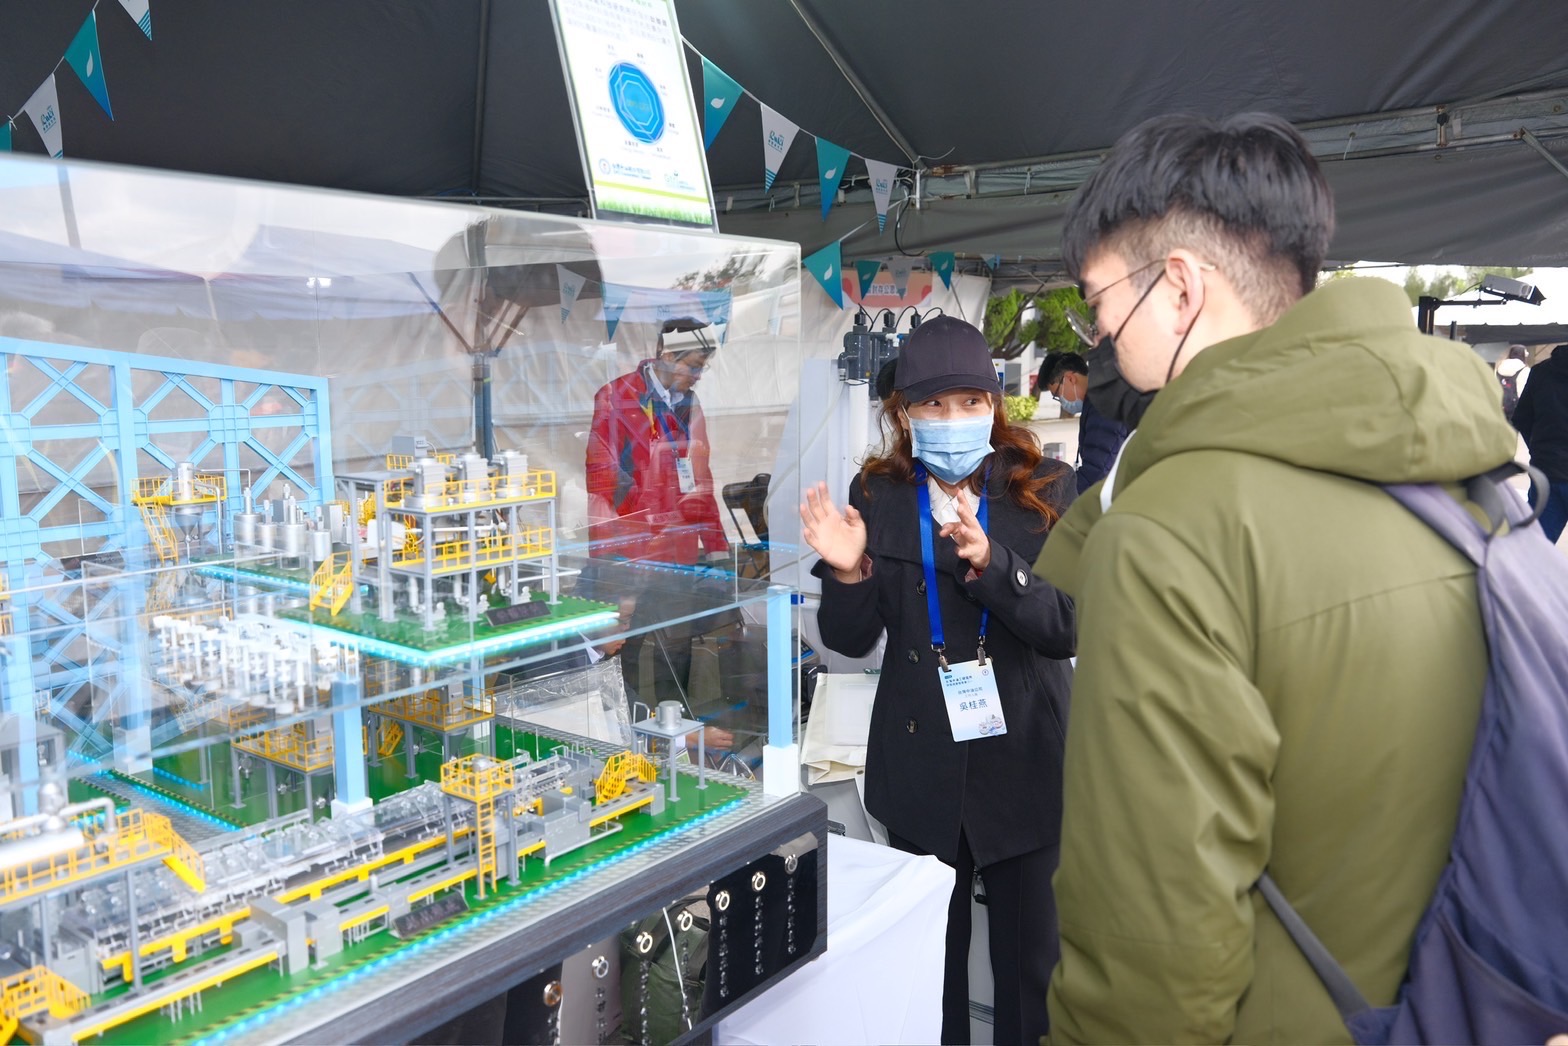 The Exploration & Production Research Institute, Green Technology Research Institute, and Refining & Manufacturing Research Institute of CPC announced their research results